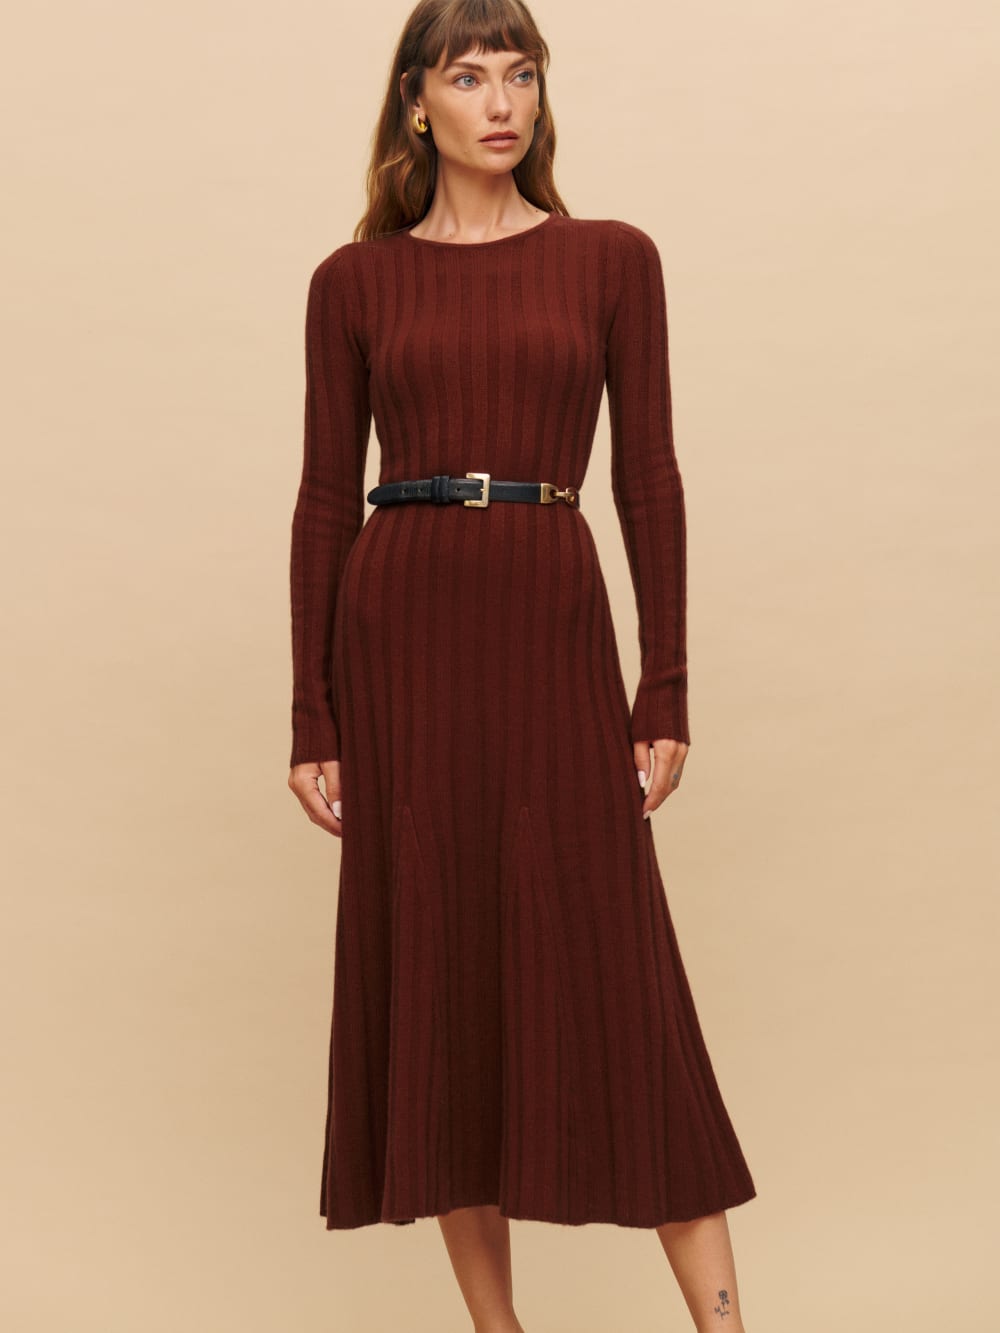 Reformation chianti cashmere sweater midi dress is designed to be fitted at bodice and waist with a relaxed skirt